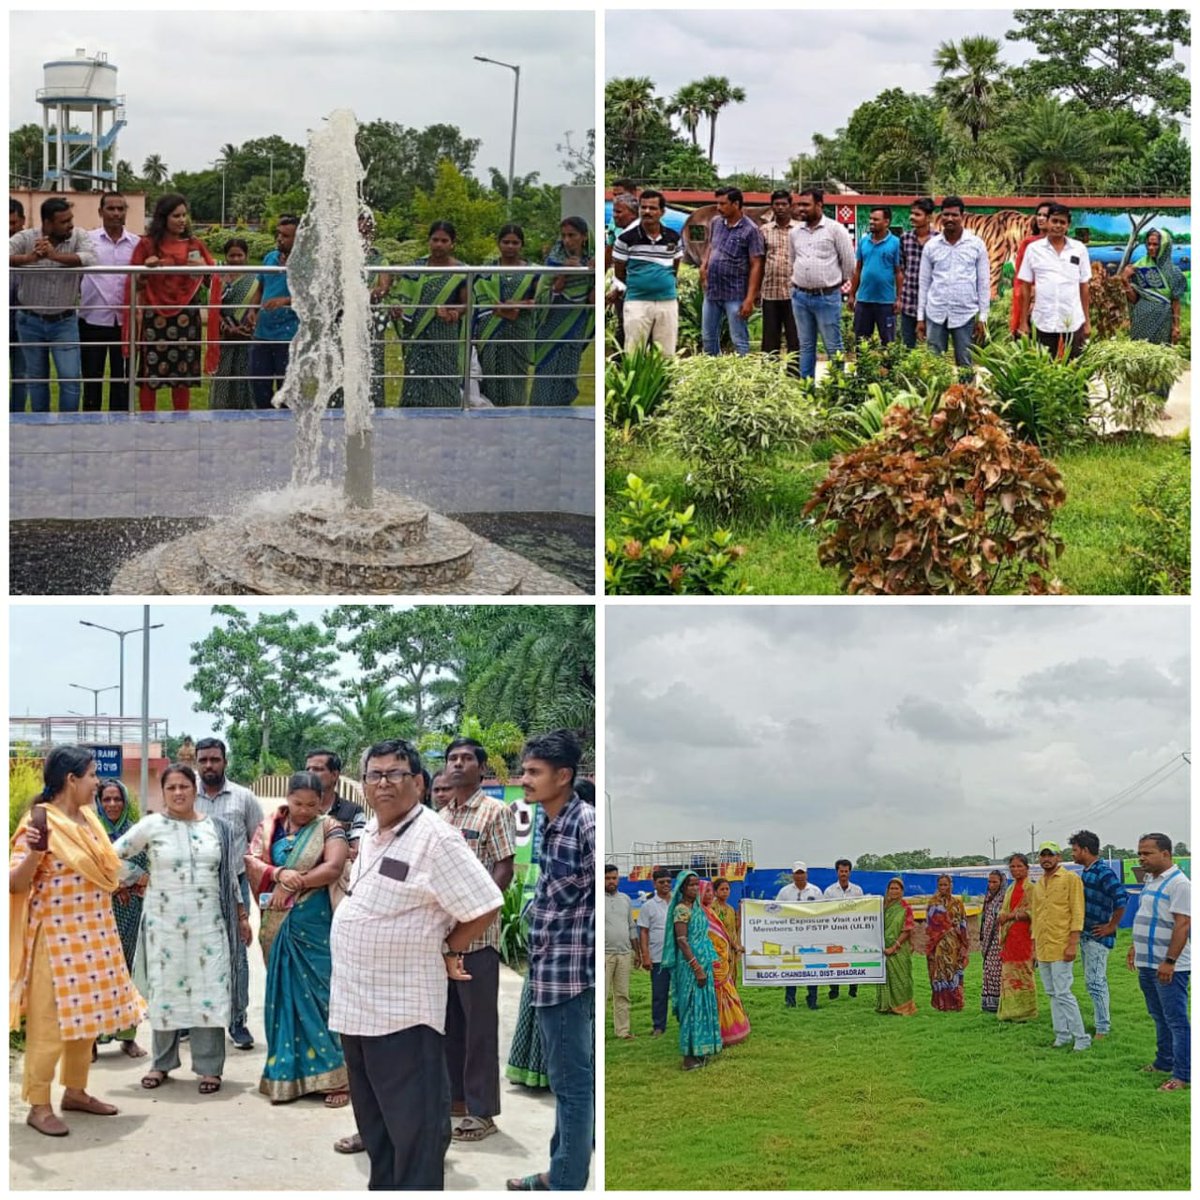 #ExposureVisit of #PRI members of #Bhadrak & #Chandbali blocks to #FSTP units under #ULBs to have an experience and knowledge sharing about the use of FSTP for #FaecalSludgeManagement and #WasteManagement.

#Sanitation #SBMG #SwacchBharatMission 
#Swacch_Odisha_Sustha_Odisha